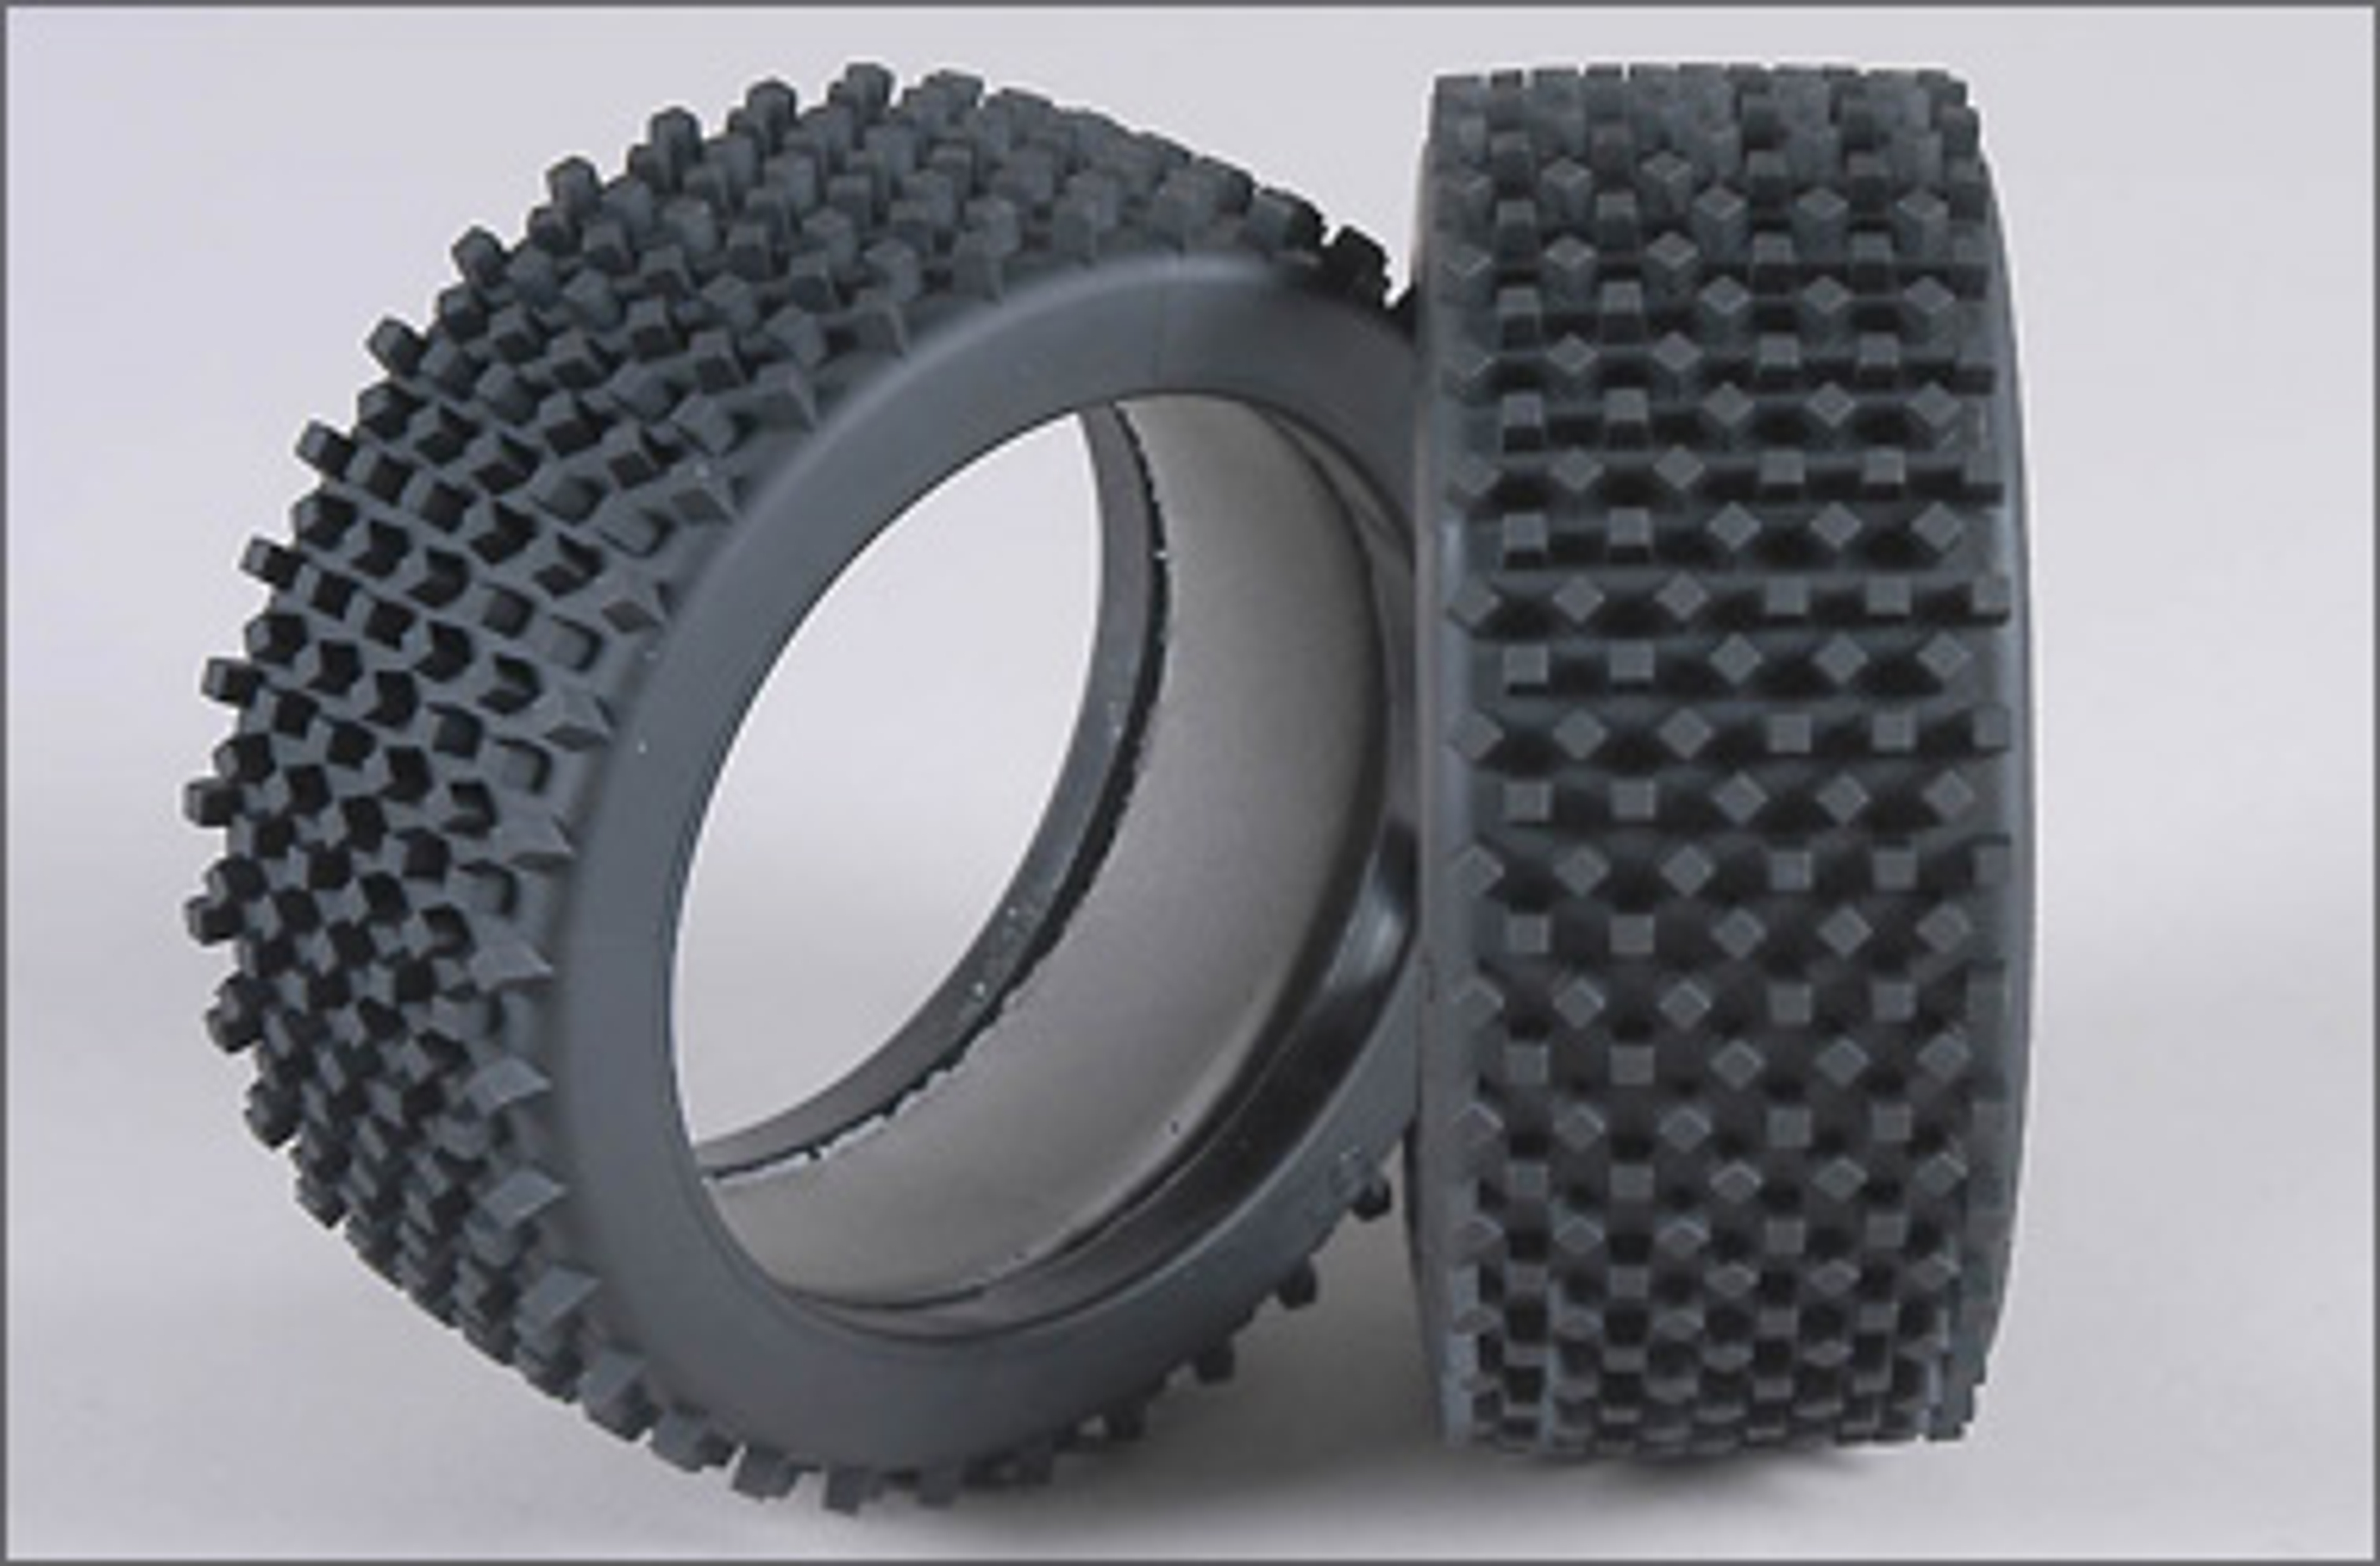 67213/03 FG Mini block H / OR tires with inserts, 2 pcs.